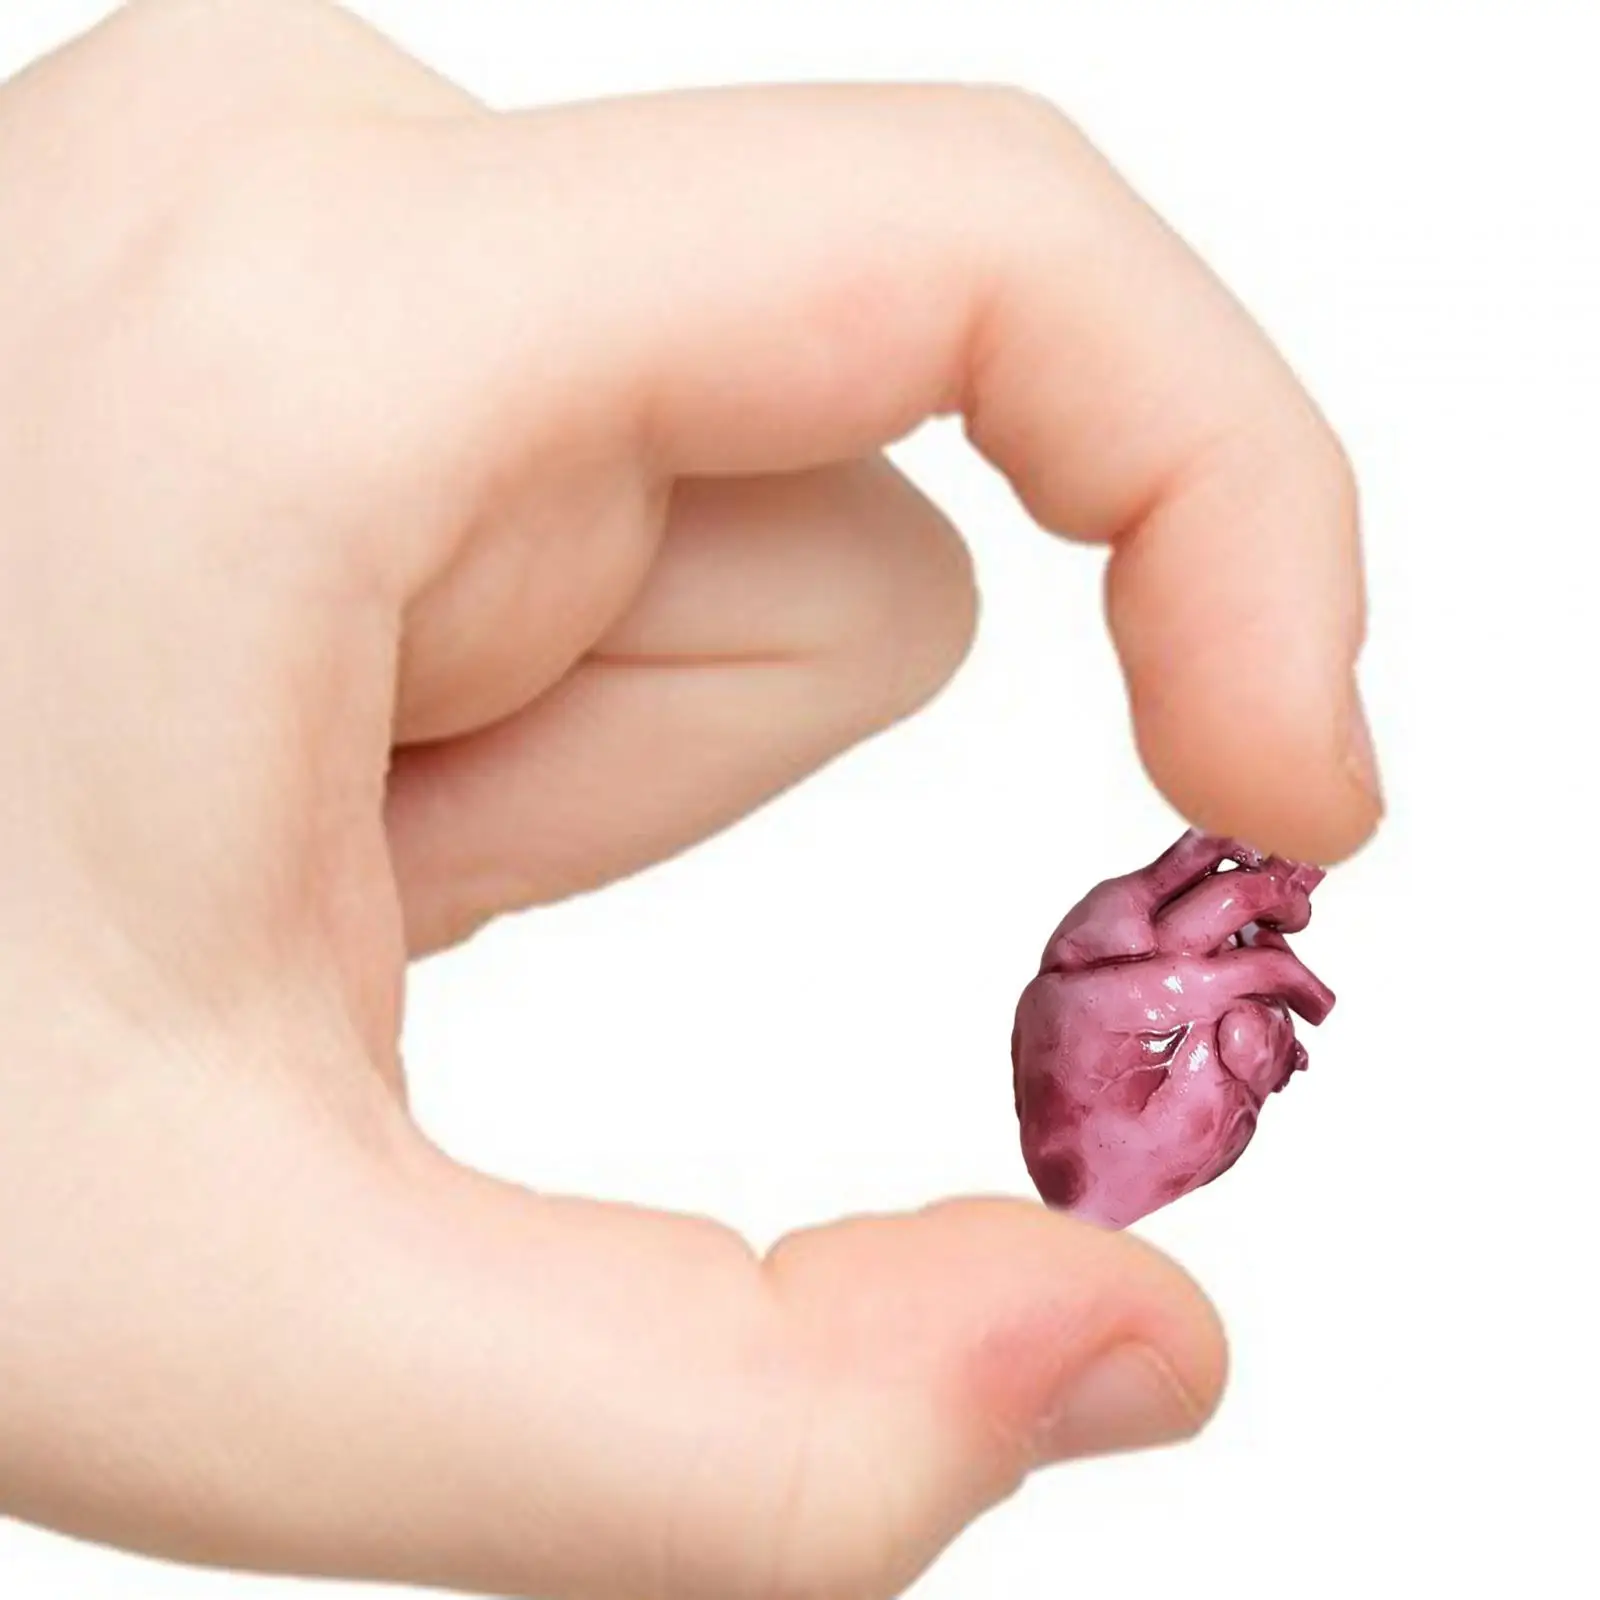 1/18 Scale Resin Heart Model Fine Workmanship Photo Prop Scene Decoration Toy for Kids Adults for 3.75in Action Figures Diorama